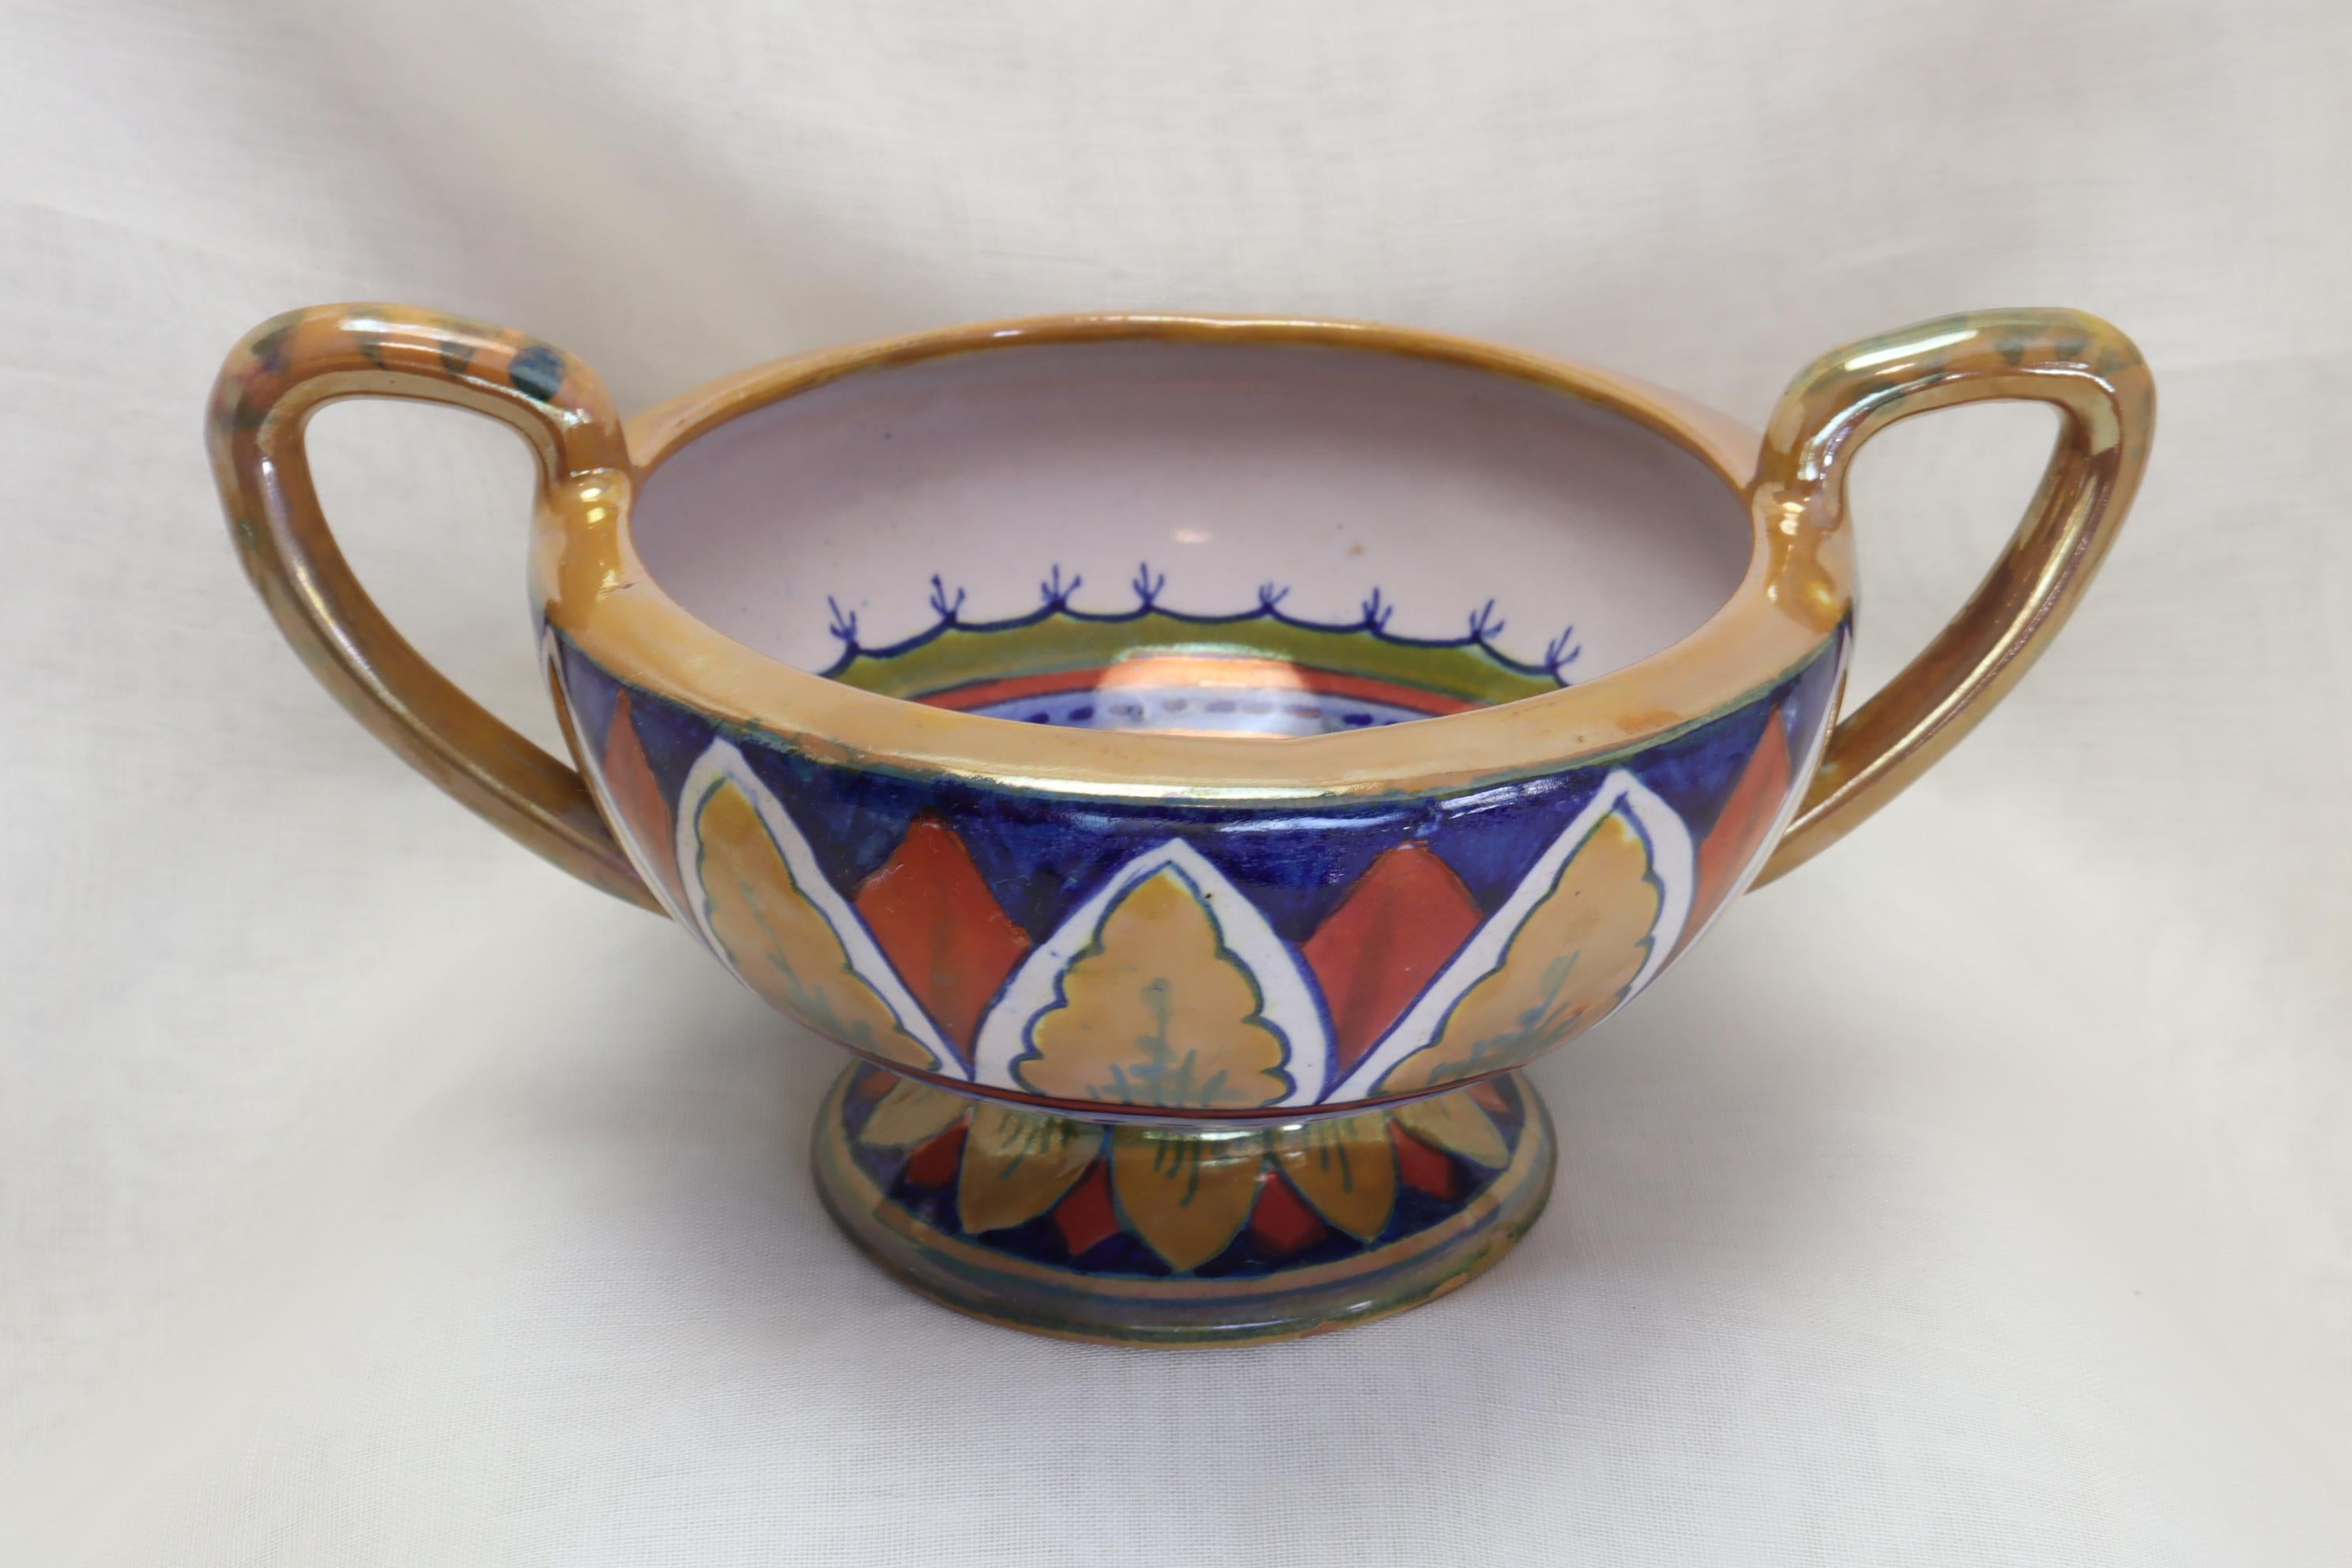 This two handled, footed bowl with a lustre glaze is by Lorenzo Rubboli of Gualdo Tadino in Umbria, Italy. The centre of the bowl is decorated with a stylised flower which is contained within several differently coloured rings. The outside features